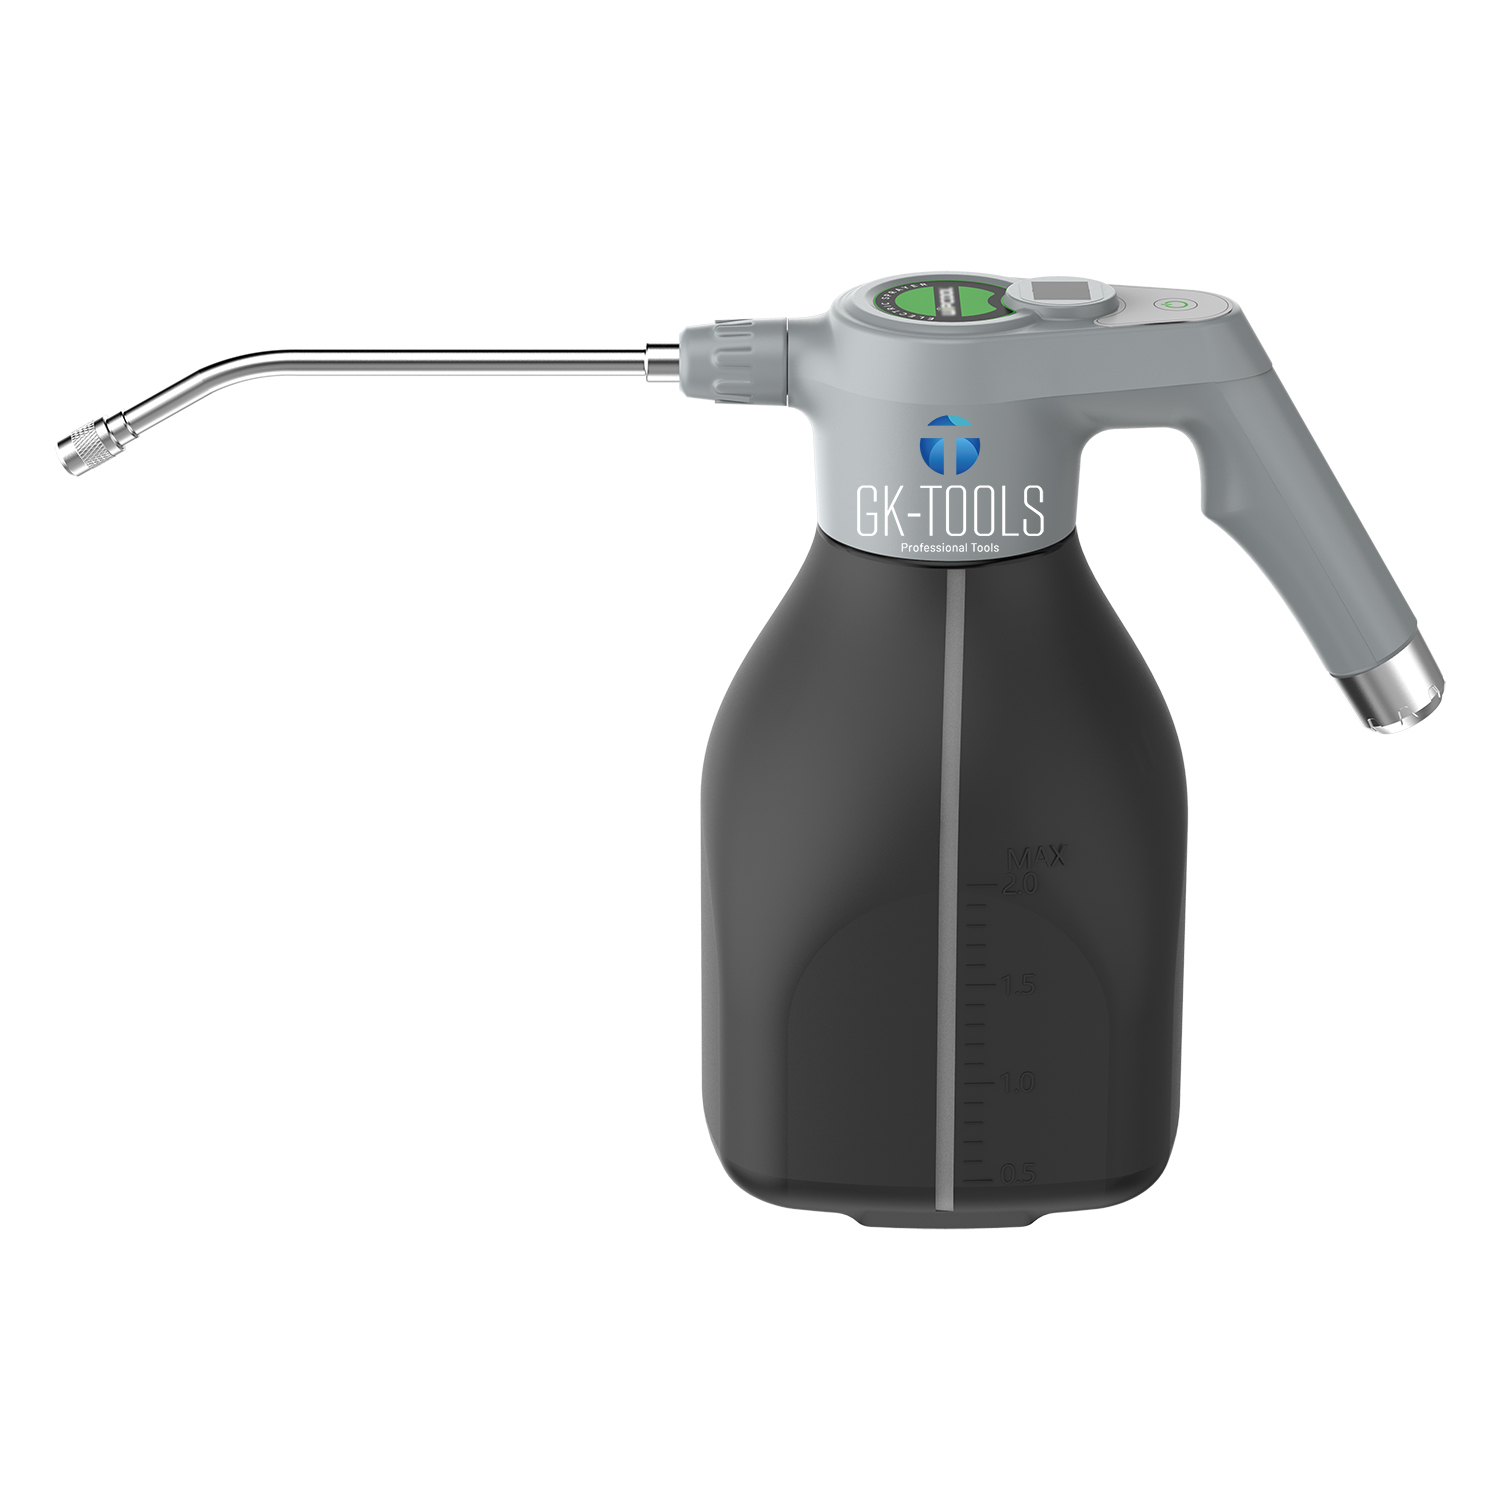 Portable rechargeable battery-powered sprayer and foamer C2BW - compatible with acid and alkaline base cleaners